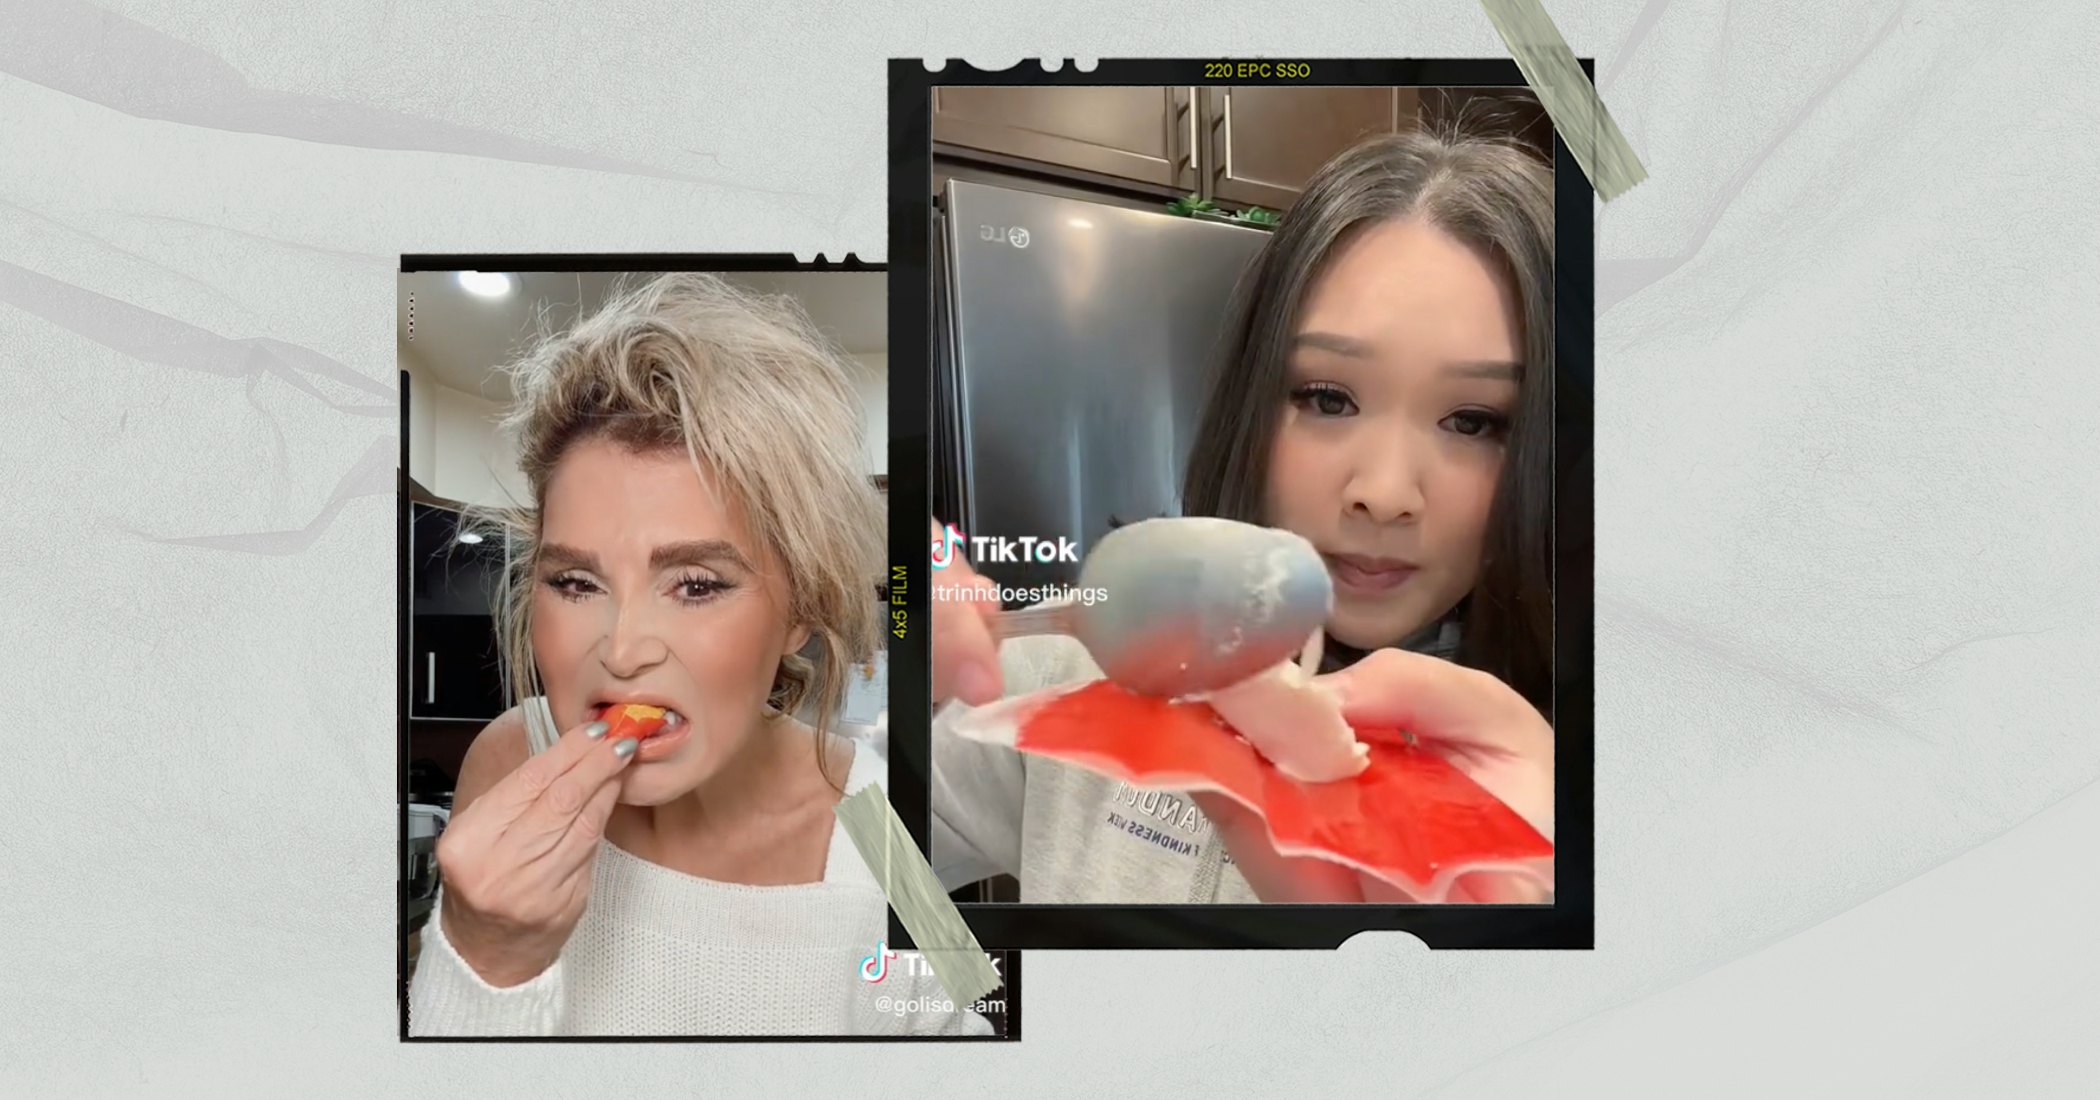 What You Should Know Before Trying TikTok's Viral Fruit Roll-Up Hack